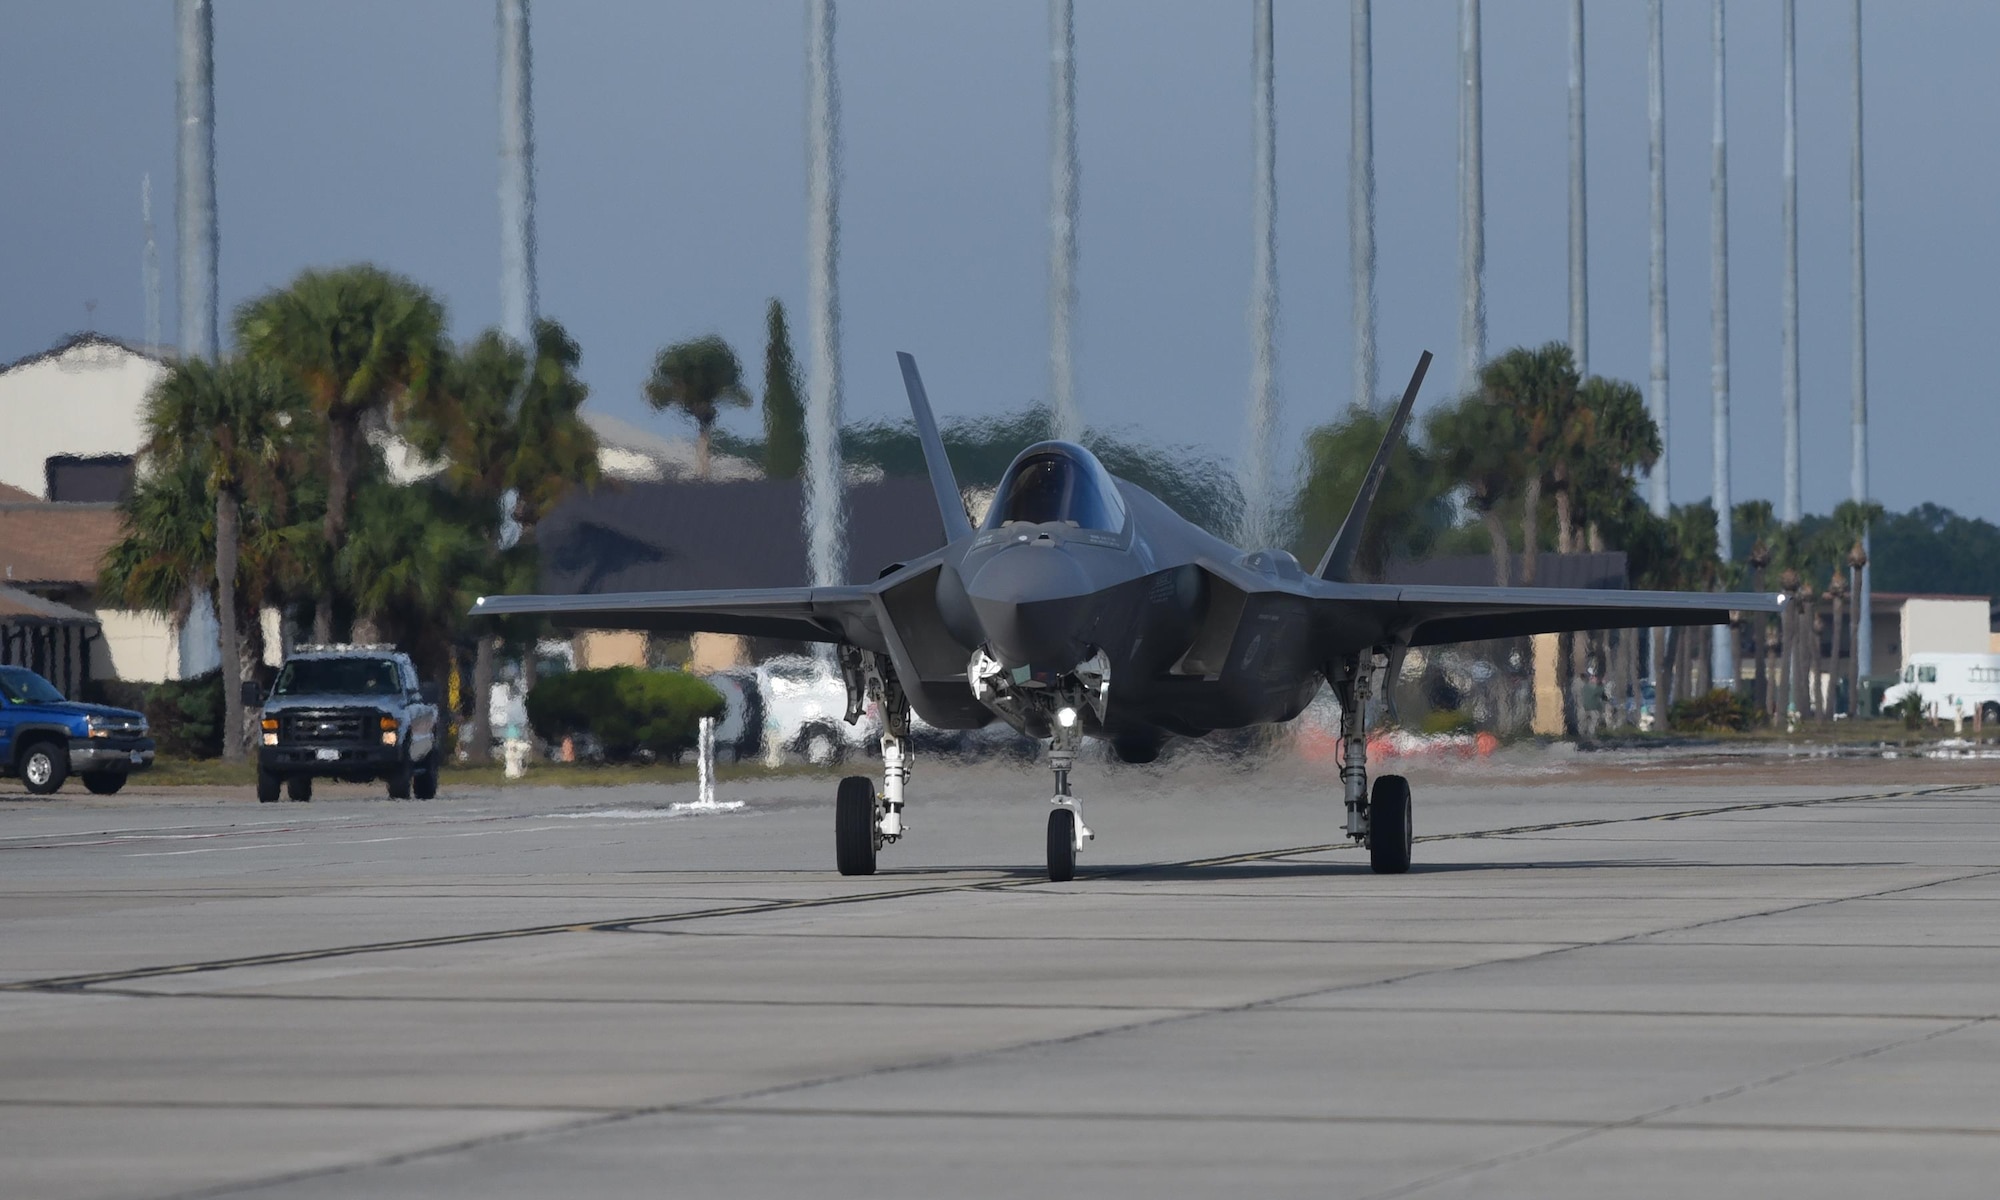 A U.S. Air Force F-35A Lightning II from Eglin Air Force Base taxis down the flightline before take-off during Checkered Flag 17-1 at Tyndall Air Force Base, Fla., Dec. 8, 2016. One of the main goals of Checkered Flag is to ensure integration and cohesion between all aircraft platforms and personnel during actual fighting integration in a real-world scenario. (U.S. Air Force photo by Staff Sgt. Alex Fox Echols III/Released)